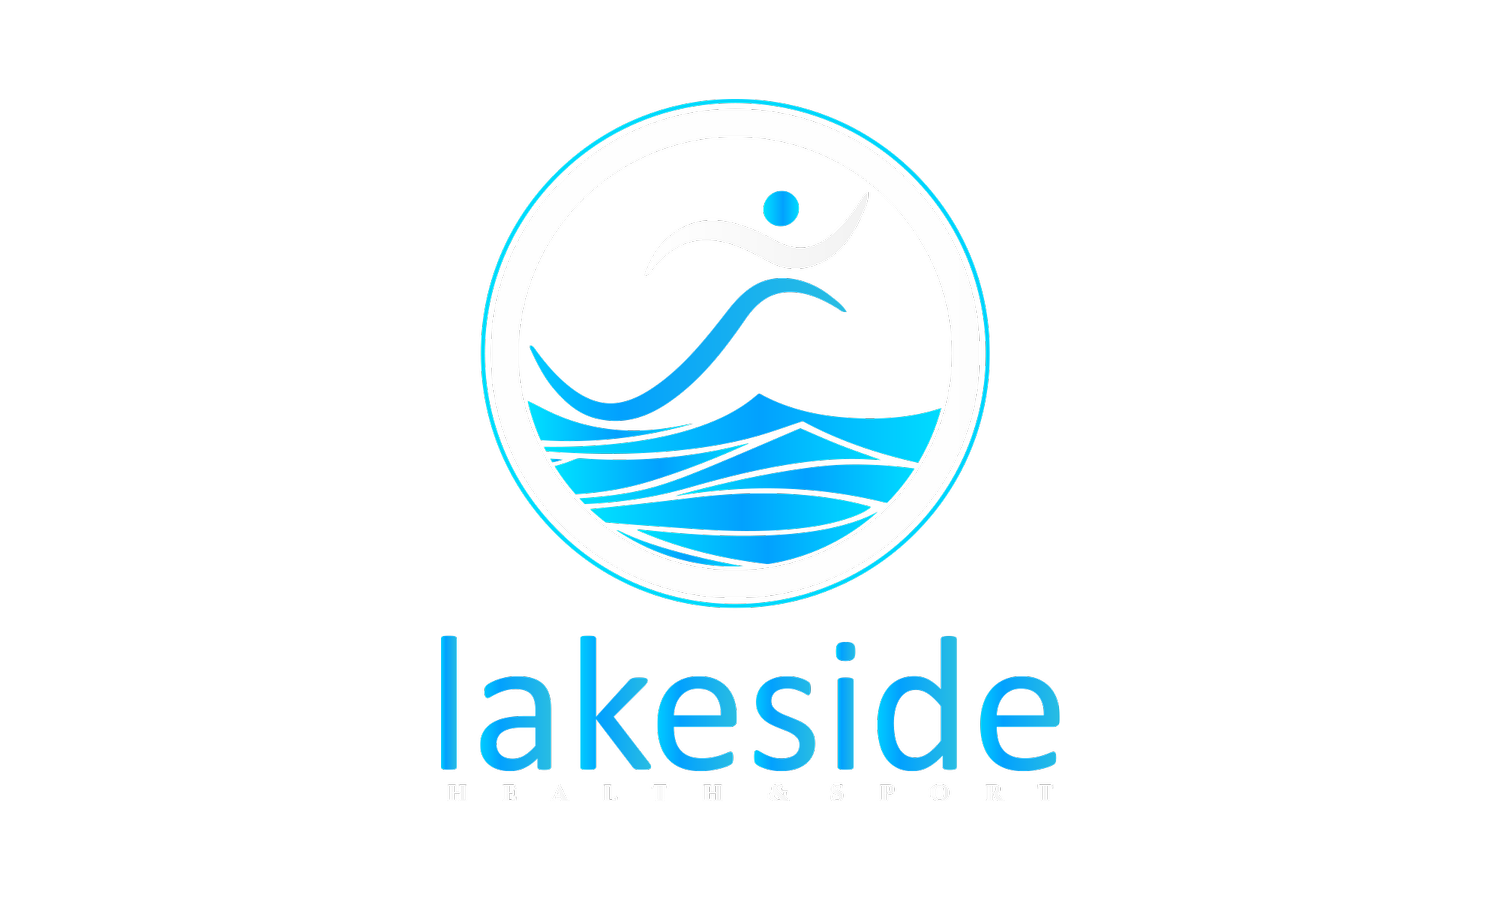 Lakeside Health and Sport - Physiotherapy, Massage, Acupuncture, Bracing, Orthotics, Compression Wear &amp; more